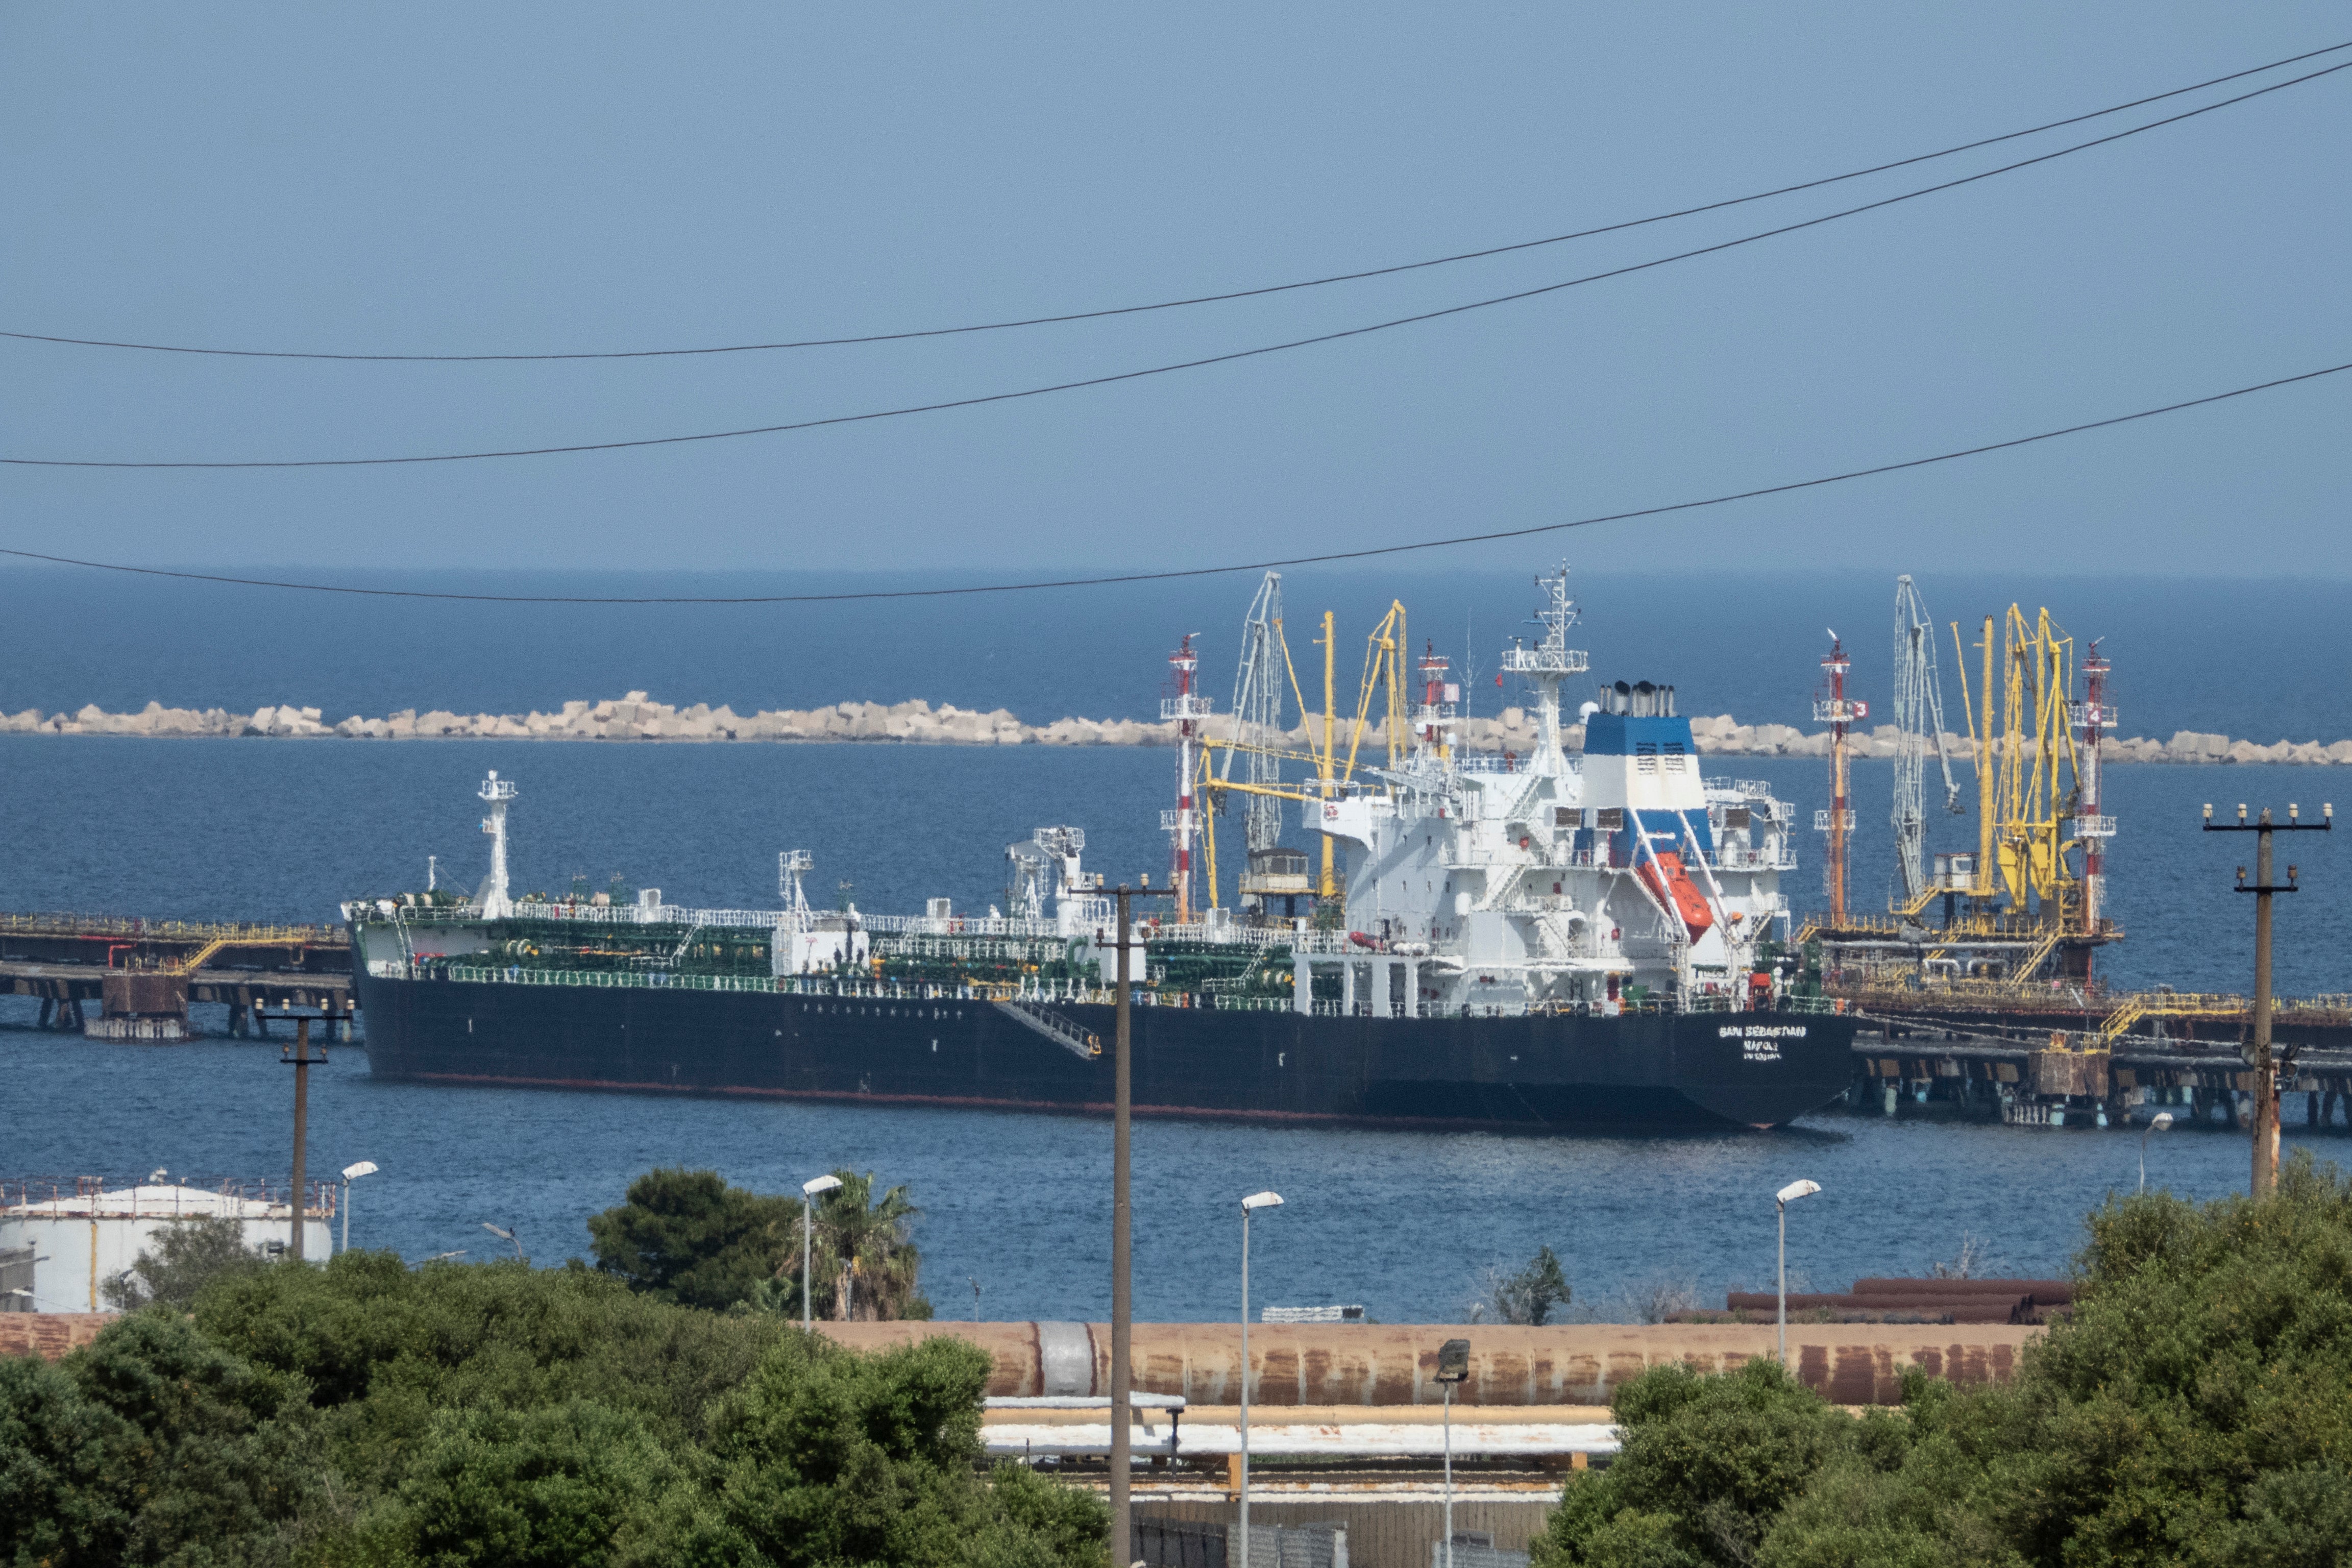 Europe has kept up shipments of Russian oil despite efforts to squeeze the country’s economy